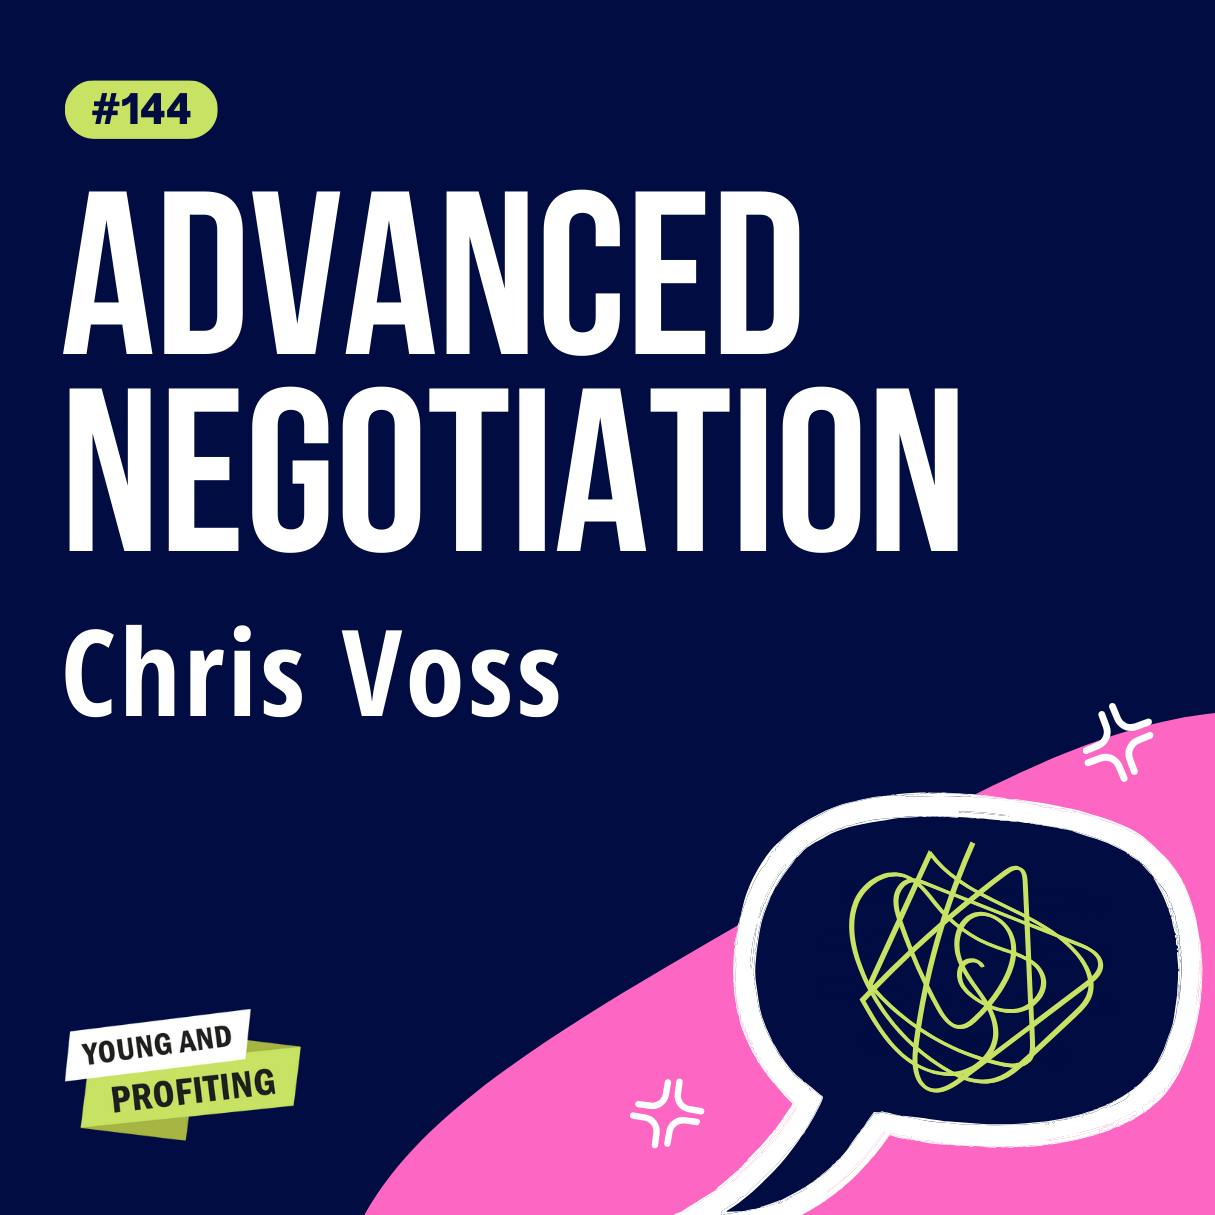 YAPClassic: Chris Voss on Advanced Negotiation, The Secret to Gaining Influence and Winning Negotiations by Hala Taha | YAP Media Network